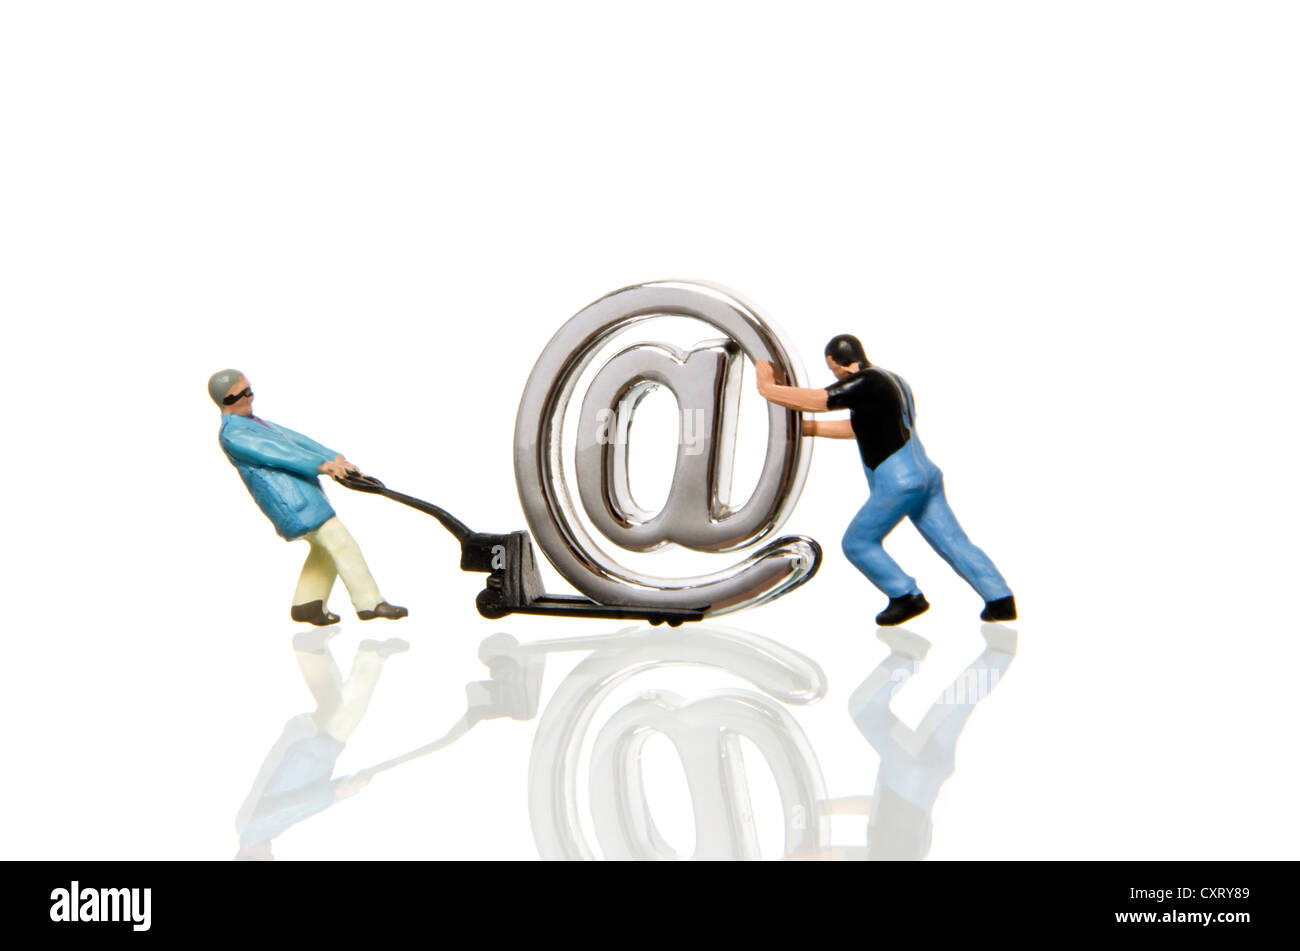 Two workers, miniature figures moving an at sign on a lifting cart, symbolic image Stock Photo